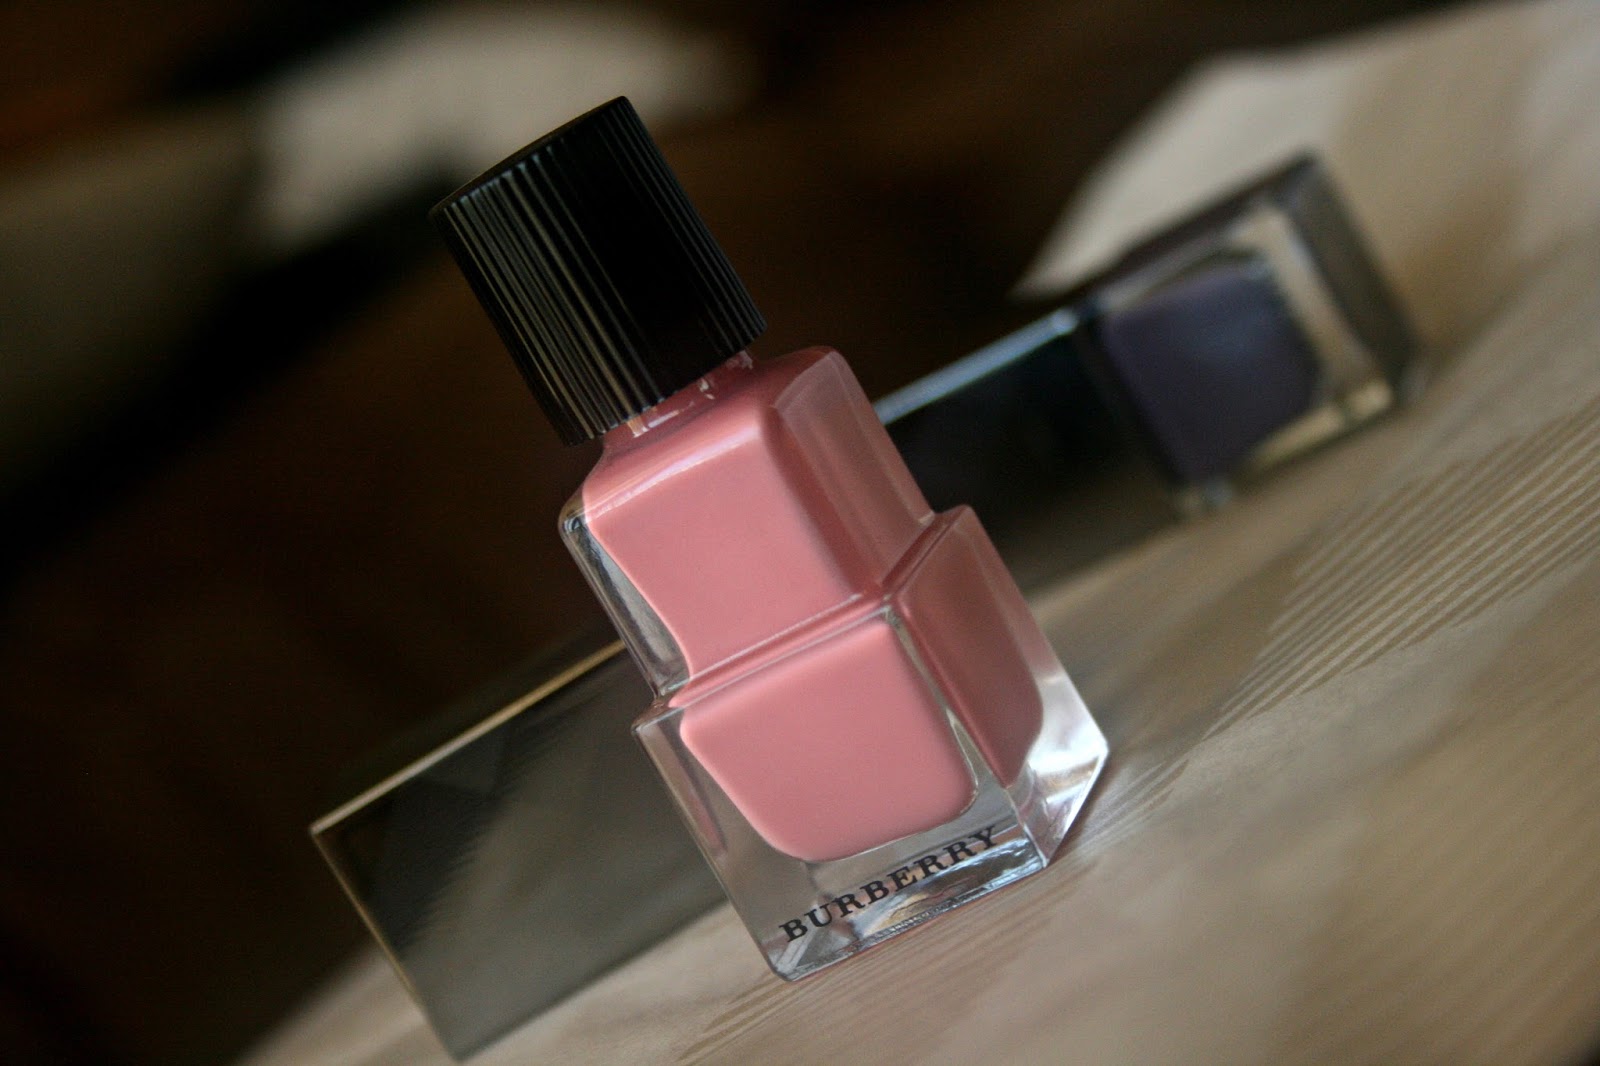 Burberry Beauty Nail Polish in Rose Pink No. 400 Review, Photo, Swatches and NOTD